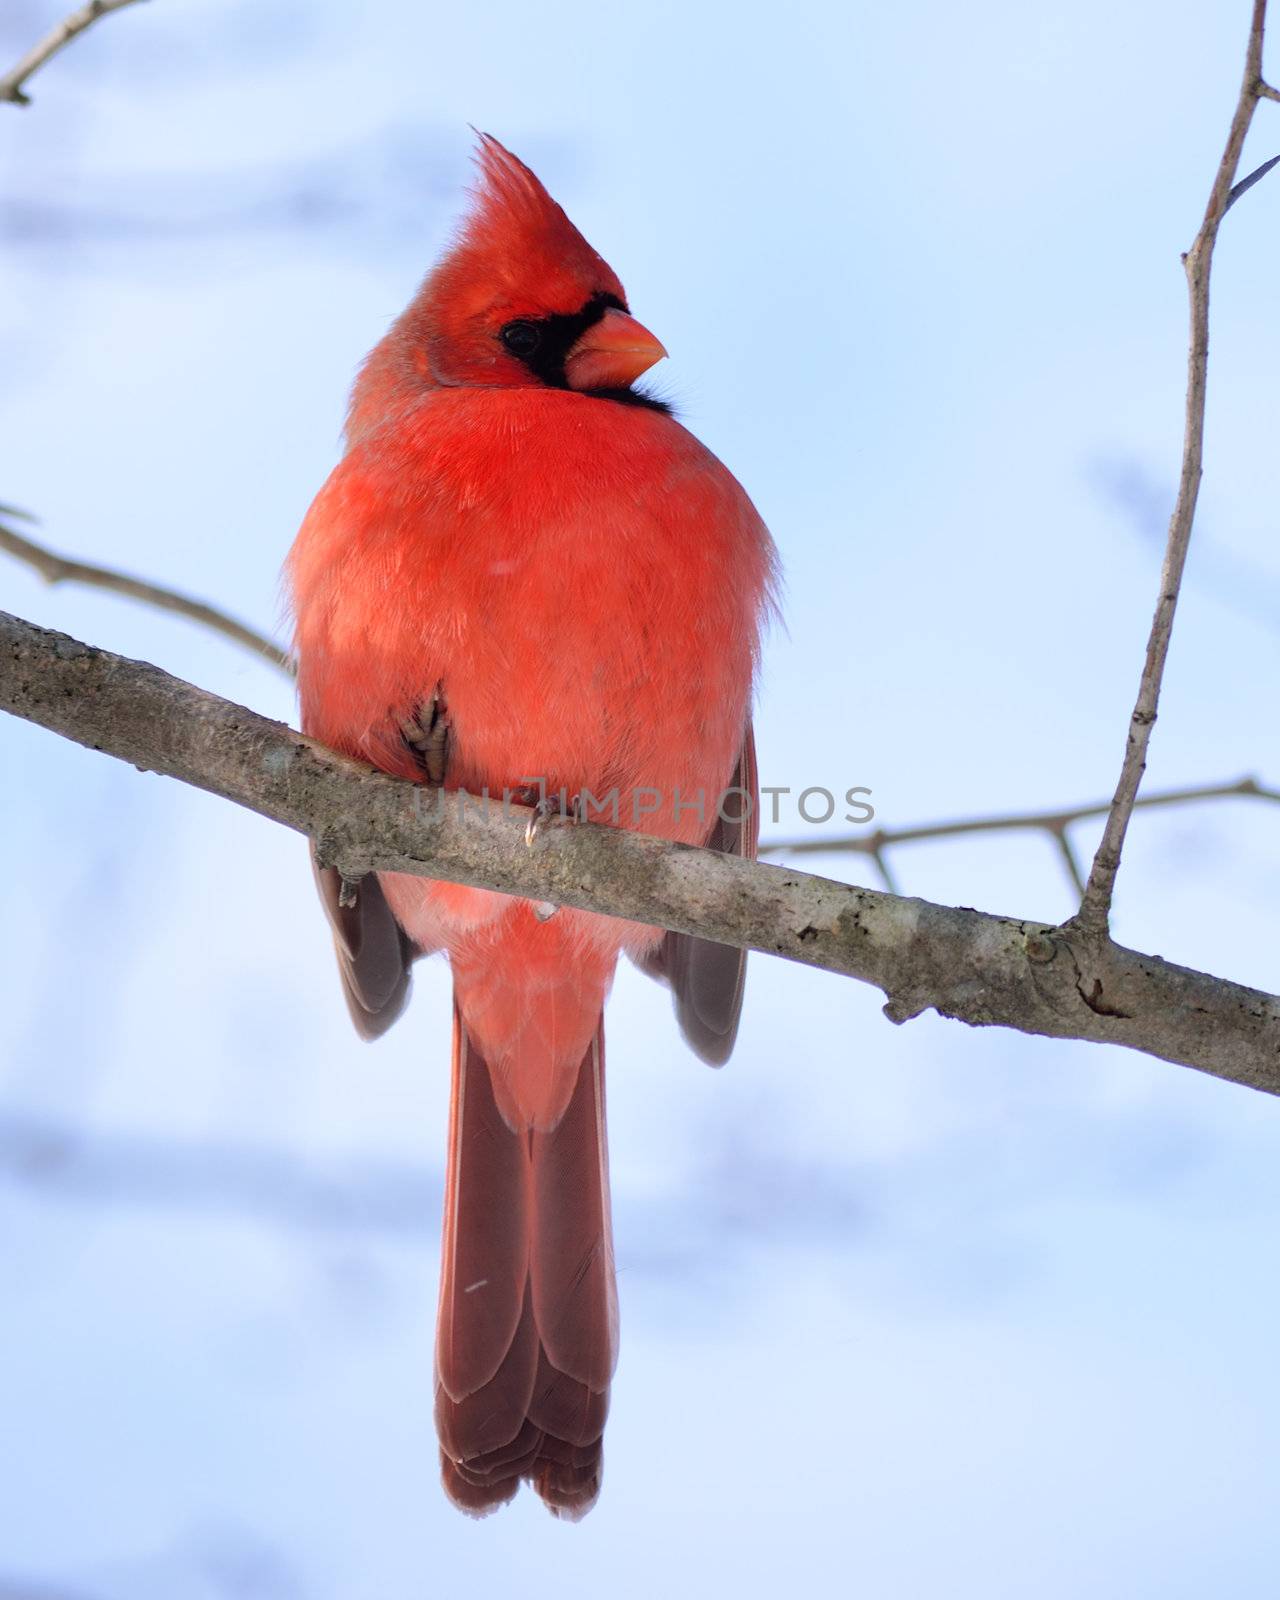 A male Cardinal perched on a tree branch.